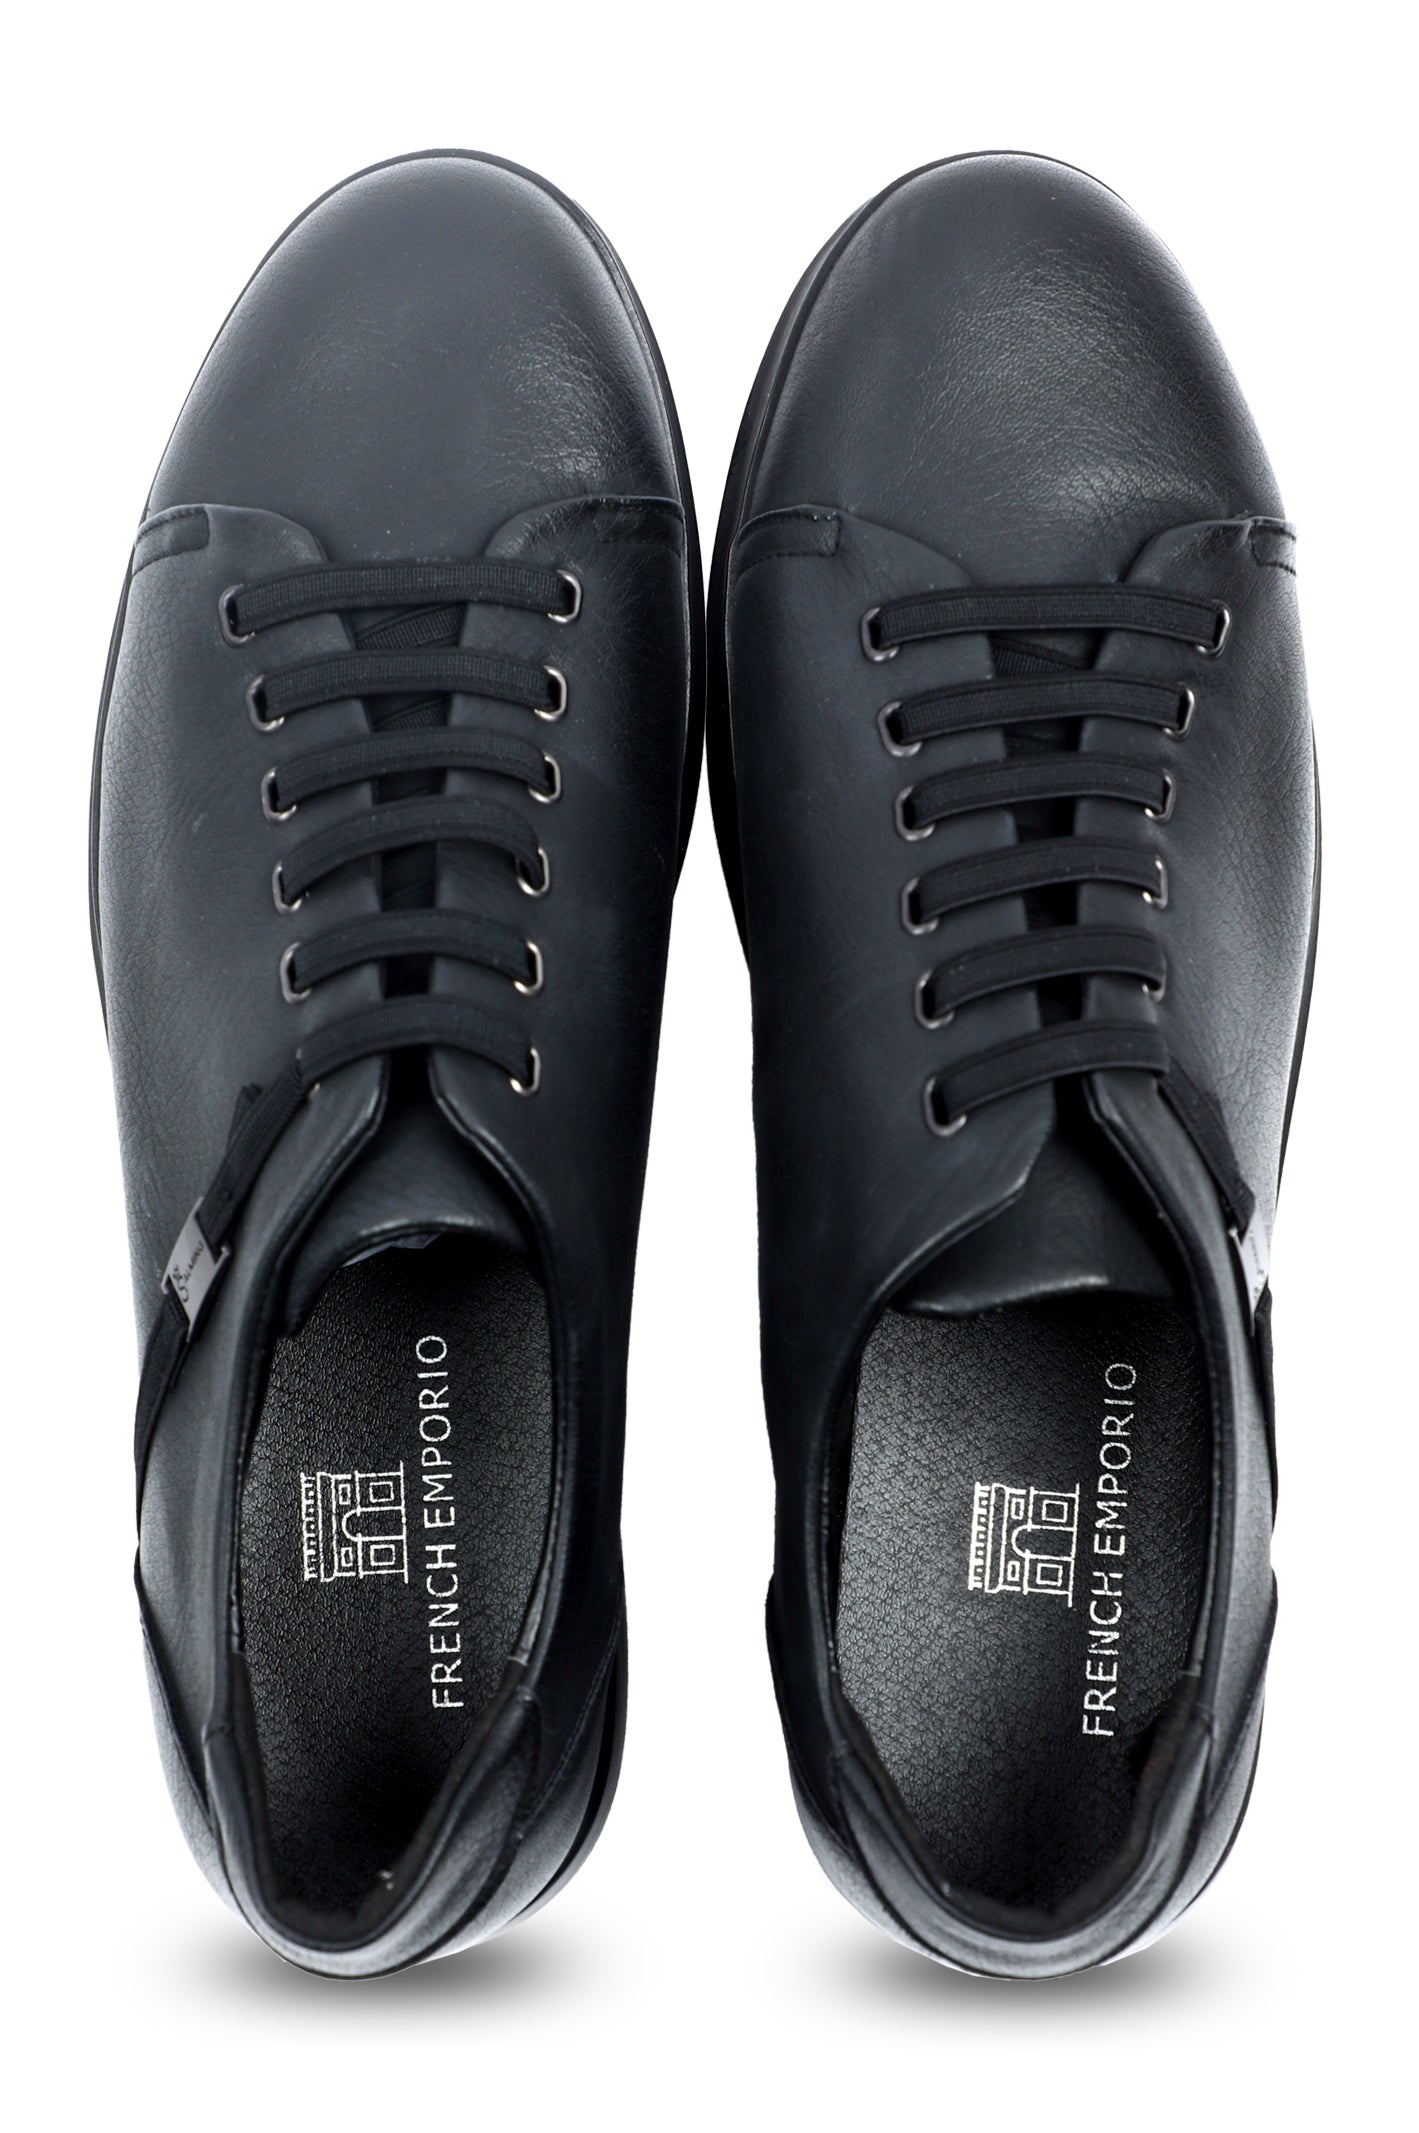 Casual Shoes For Men in Black SKU: SMJ0010-BLACK - Diners